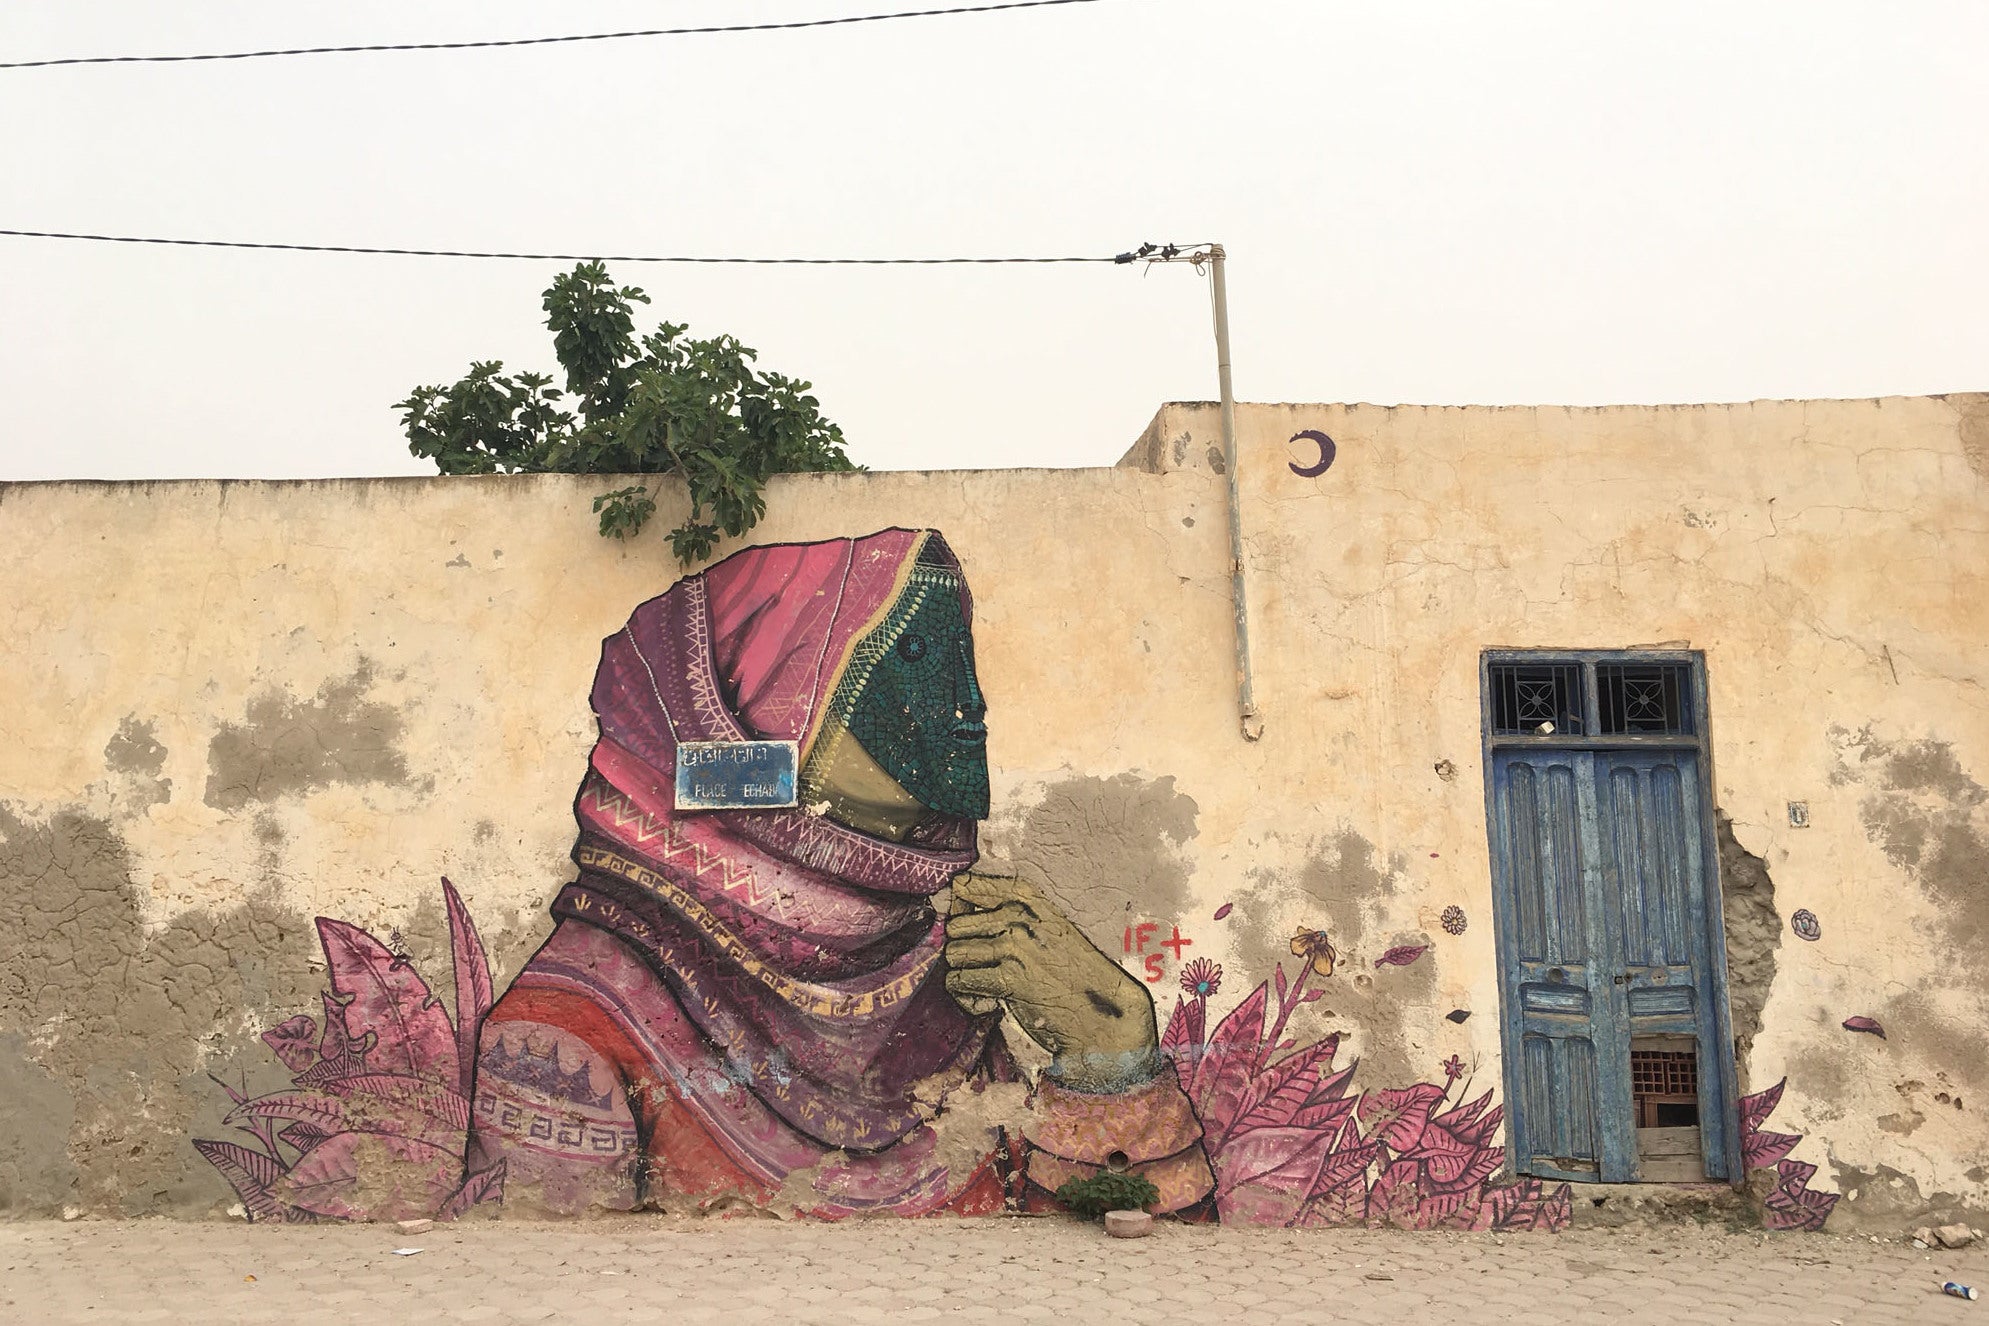 The walls of Erriadh are peppered with street art from a cultural identity project in 2014